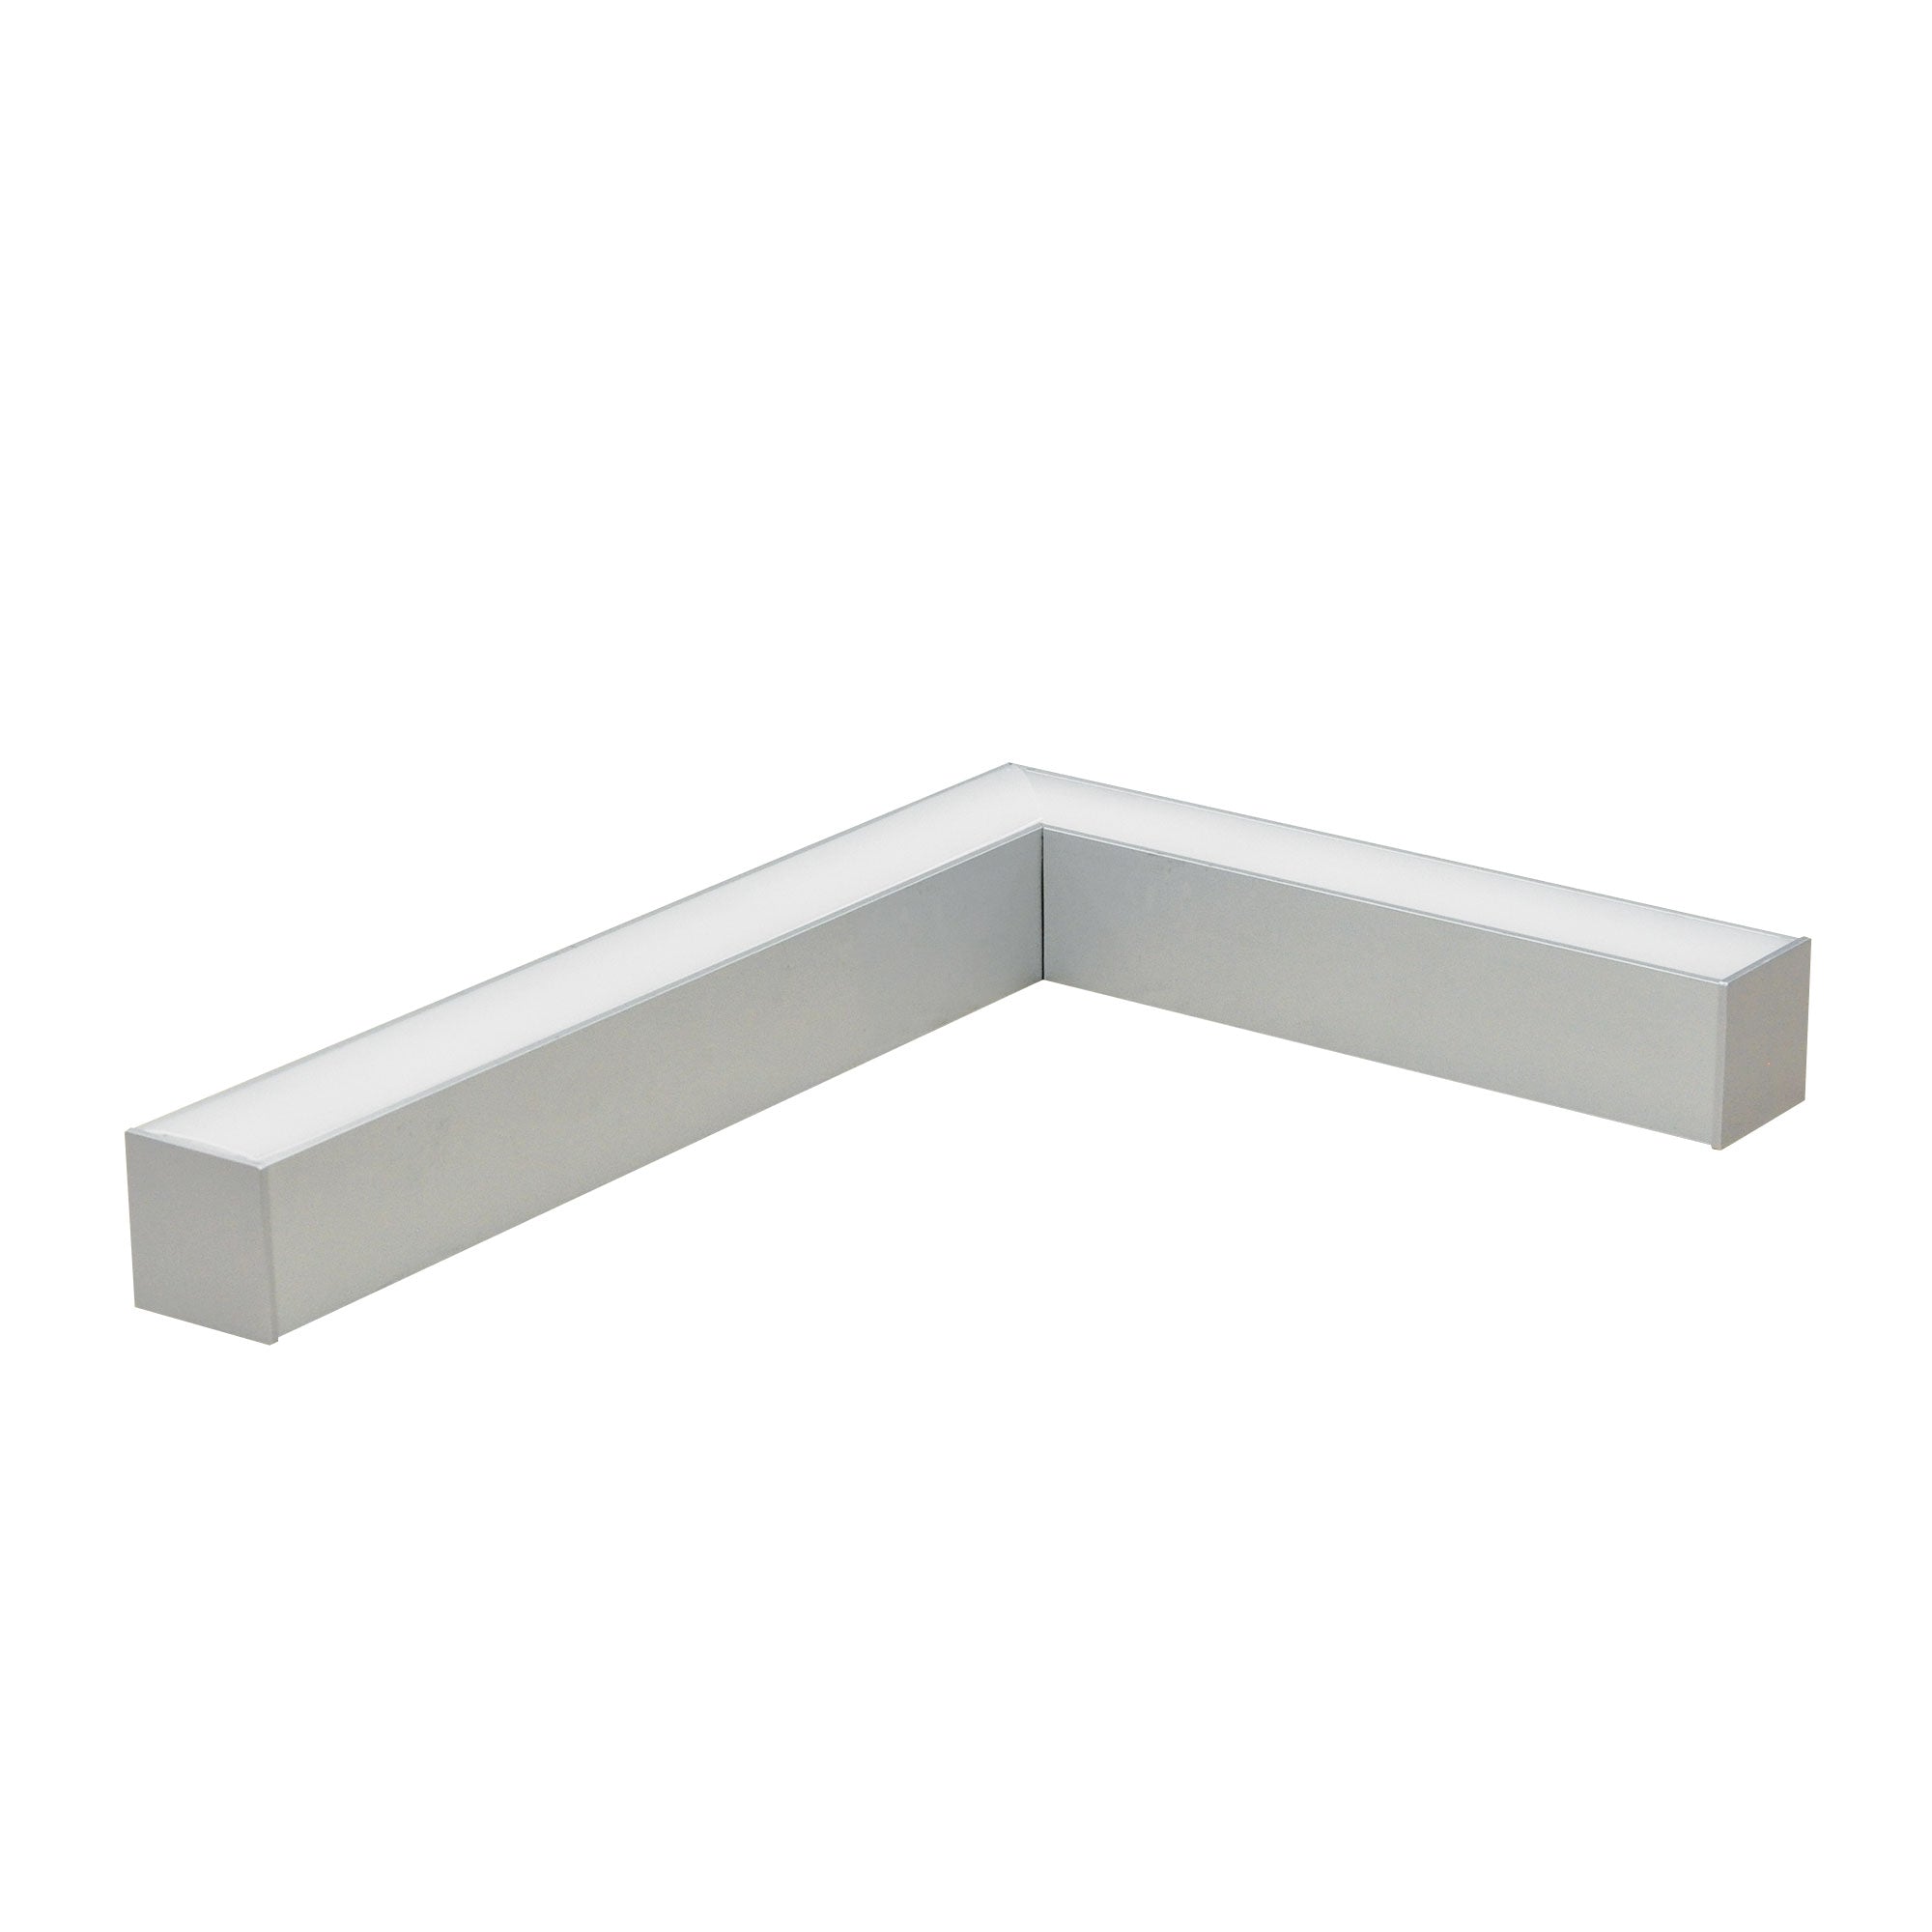 Nora Lighting NLIN-L1030A - Linear -  InchL Inch Shaped L-Line LED Direct Linear w/ Dedicated CCT, 3000lm / 3000K, Aluminum Finish